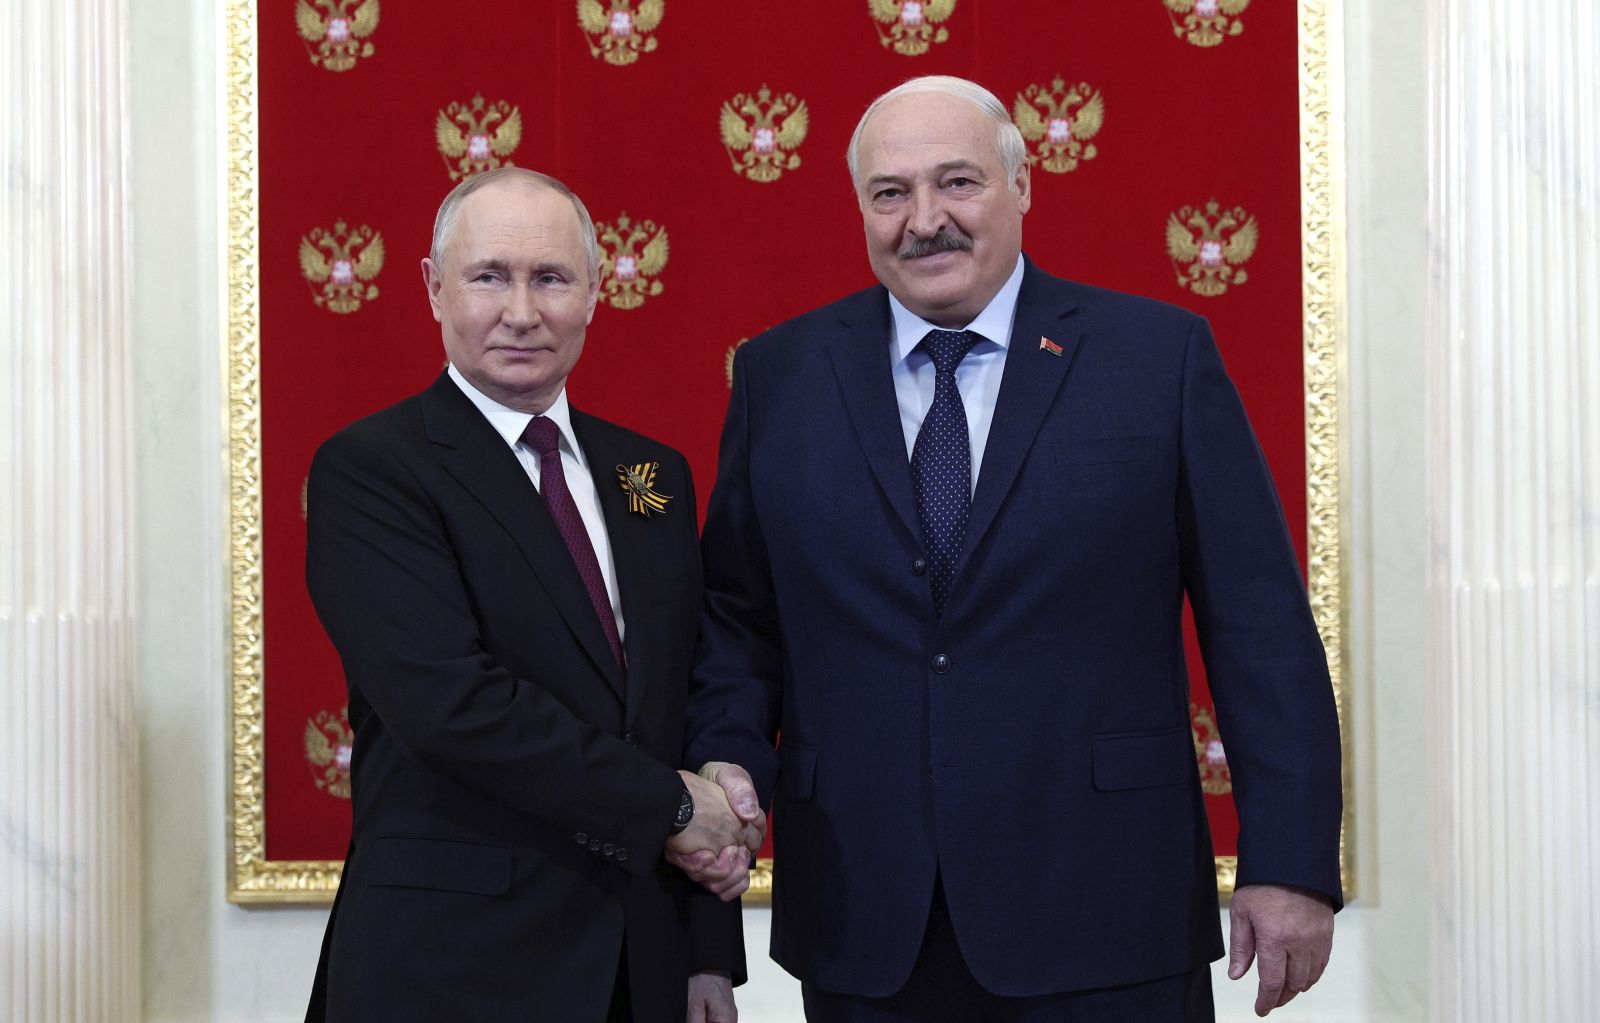 epa10616943 Russian President Vladimir Putin (L) shakes hands with Belarus President Alexander Lukashenko (R) during their meeting at the Kremlin before a Victory Day military parade on Red Square in Moscow, Russia, 09 May 2023. Russia marks the 78th anniversary of the victory in World War II over Nazi Germany and its allies. The Soviet Union lost 27 million people in the war.  EPA/VLADIMIR SMIRNOV / SPUTNIK / KREMLIN POOL MANDATORY CREDIT